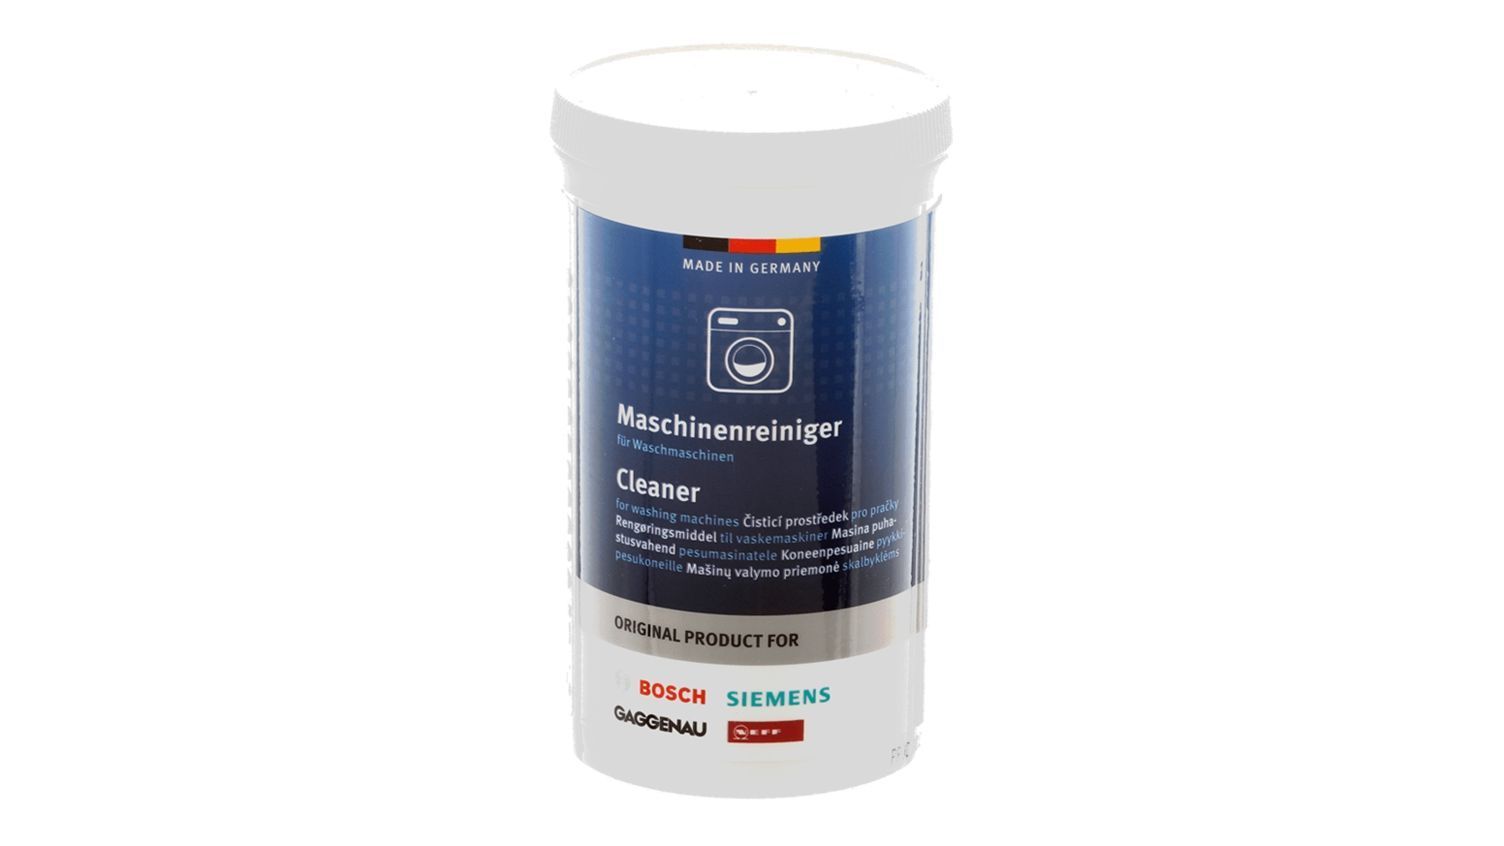 Cleaning Agent for Bosch Siemens Washing Machines - 00311926 BSH